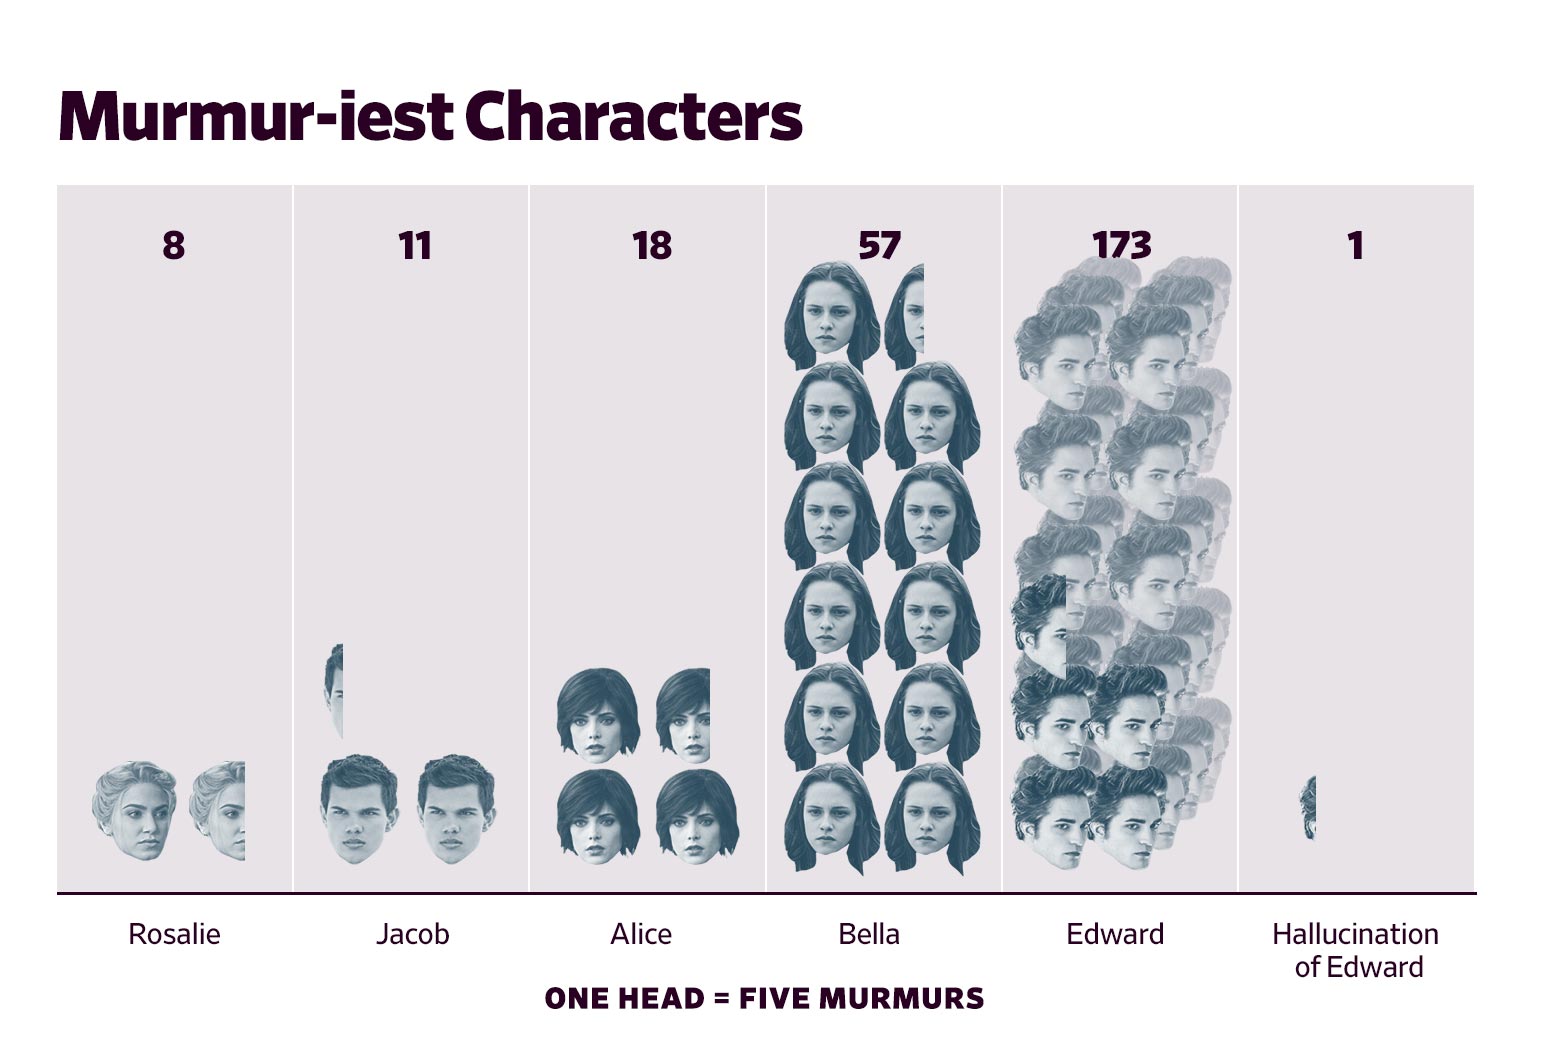 A graph showing that Edward murmurs the most, followed by Bella, Alice, Jacob, Rosalie, and finally the hallucination of Edward.